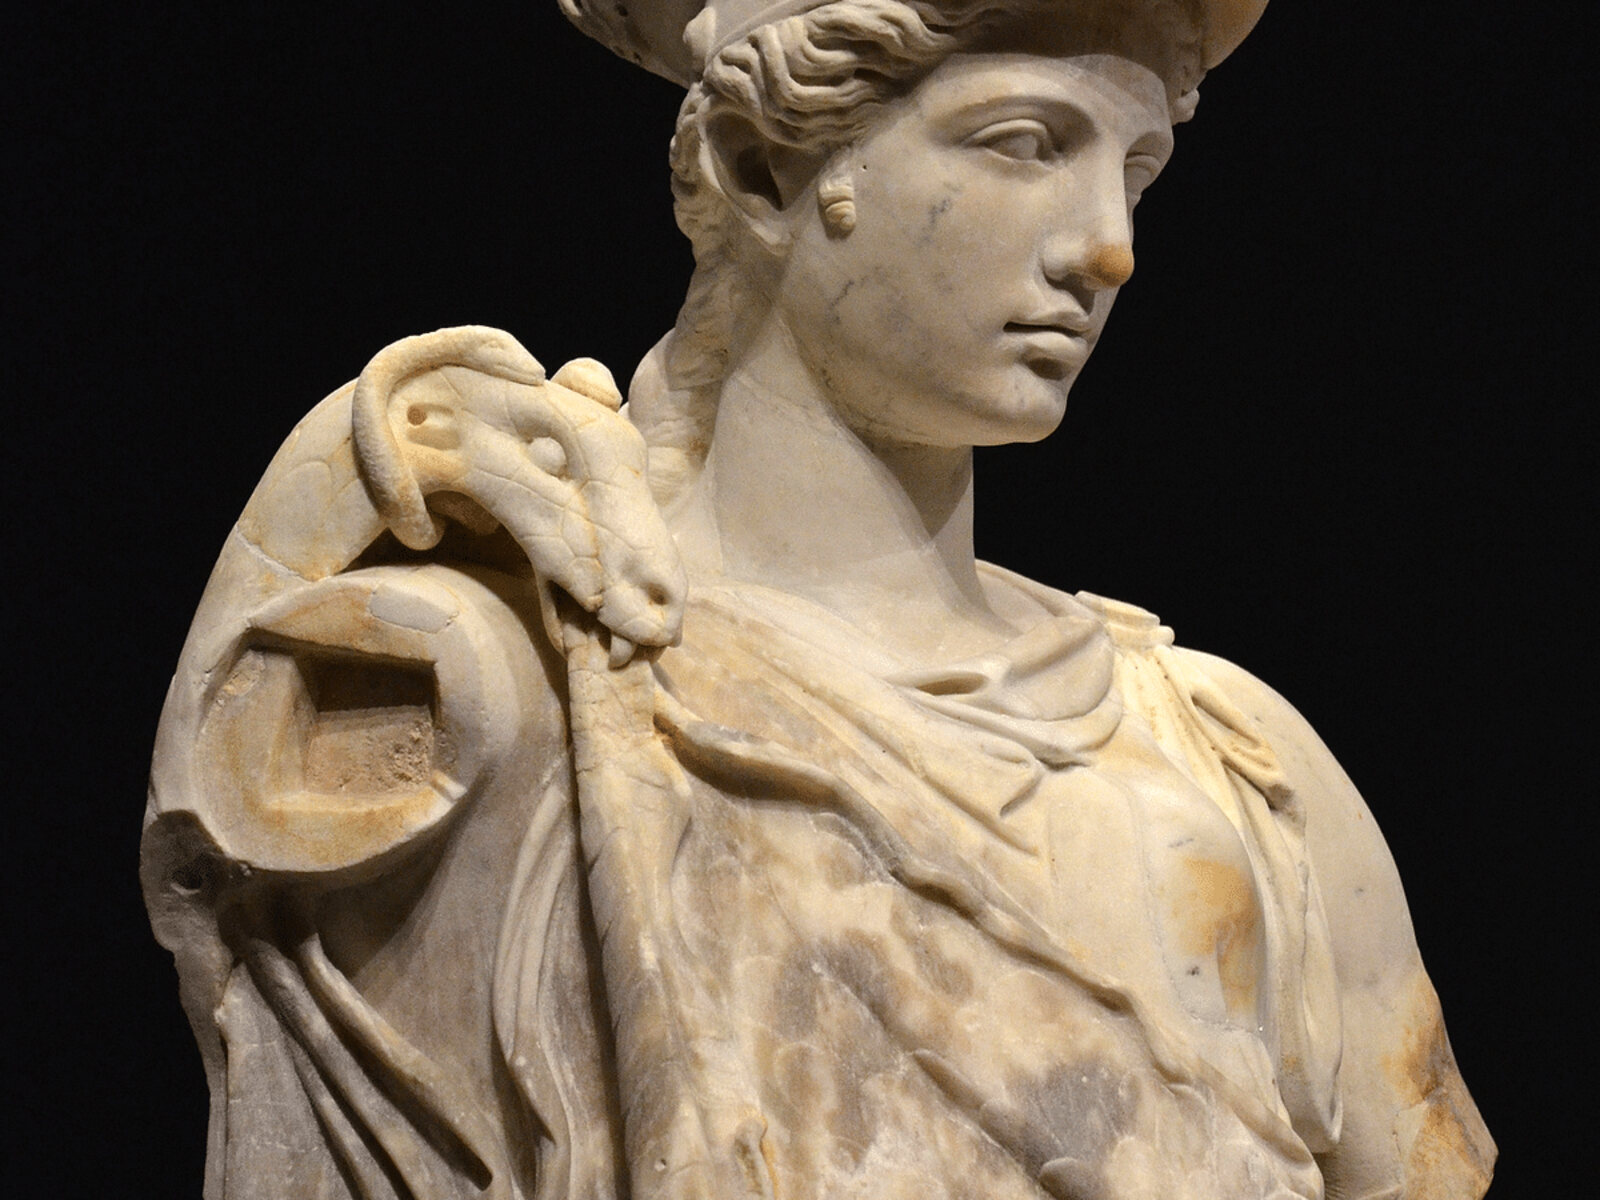 What Do The Greeks Consider To Be The Best Form Of Art Or Sculpture?